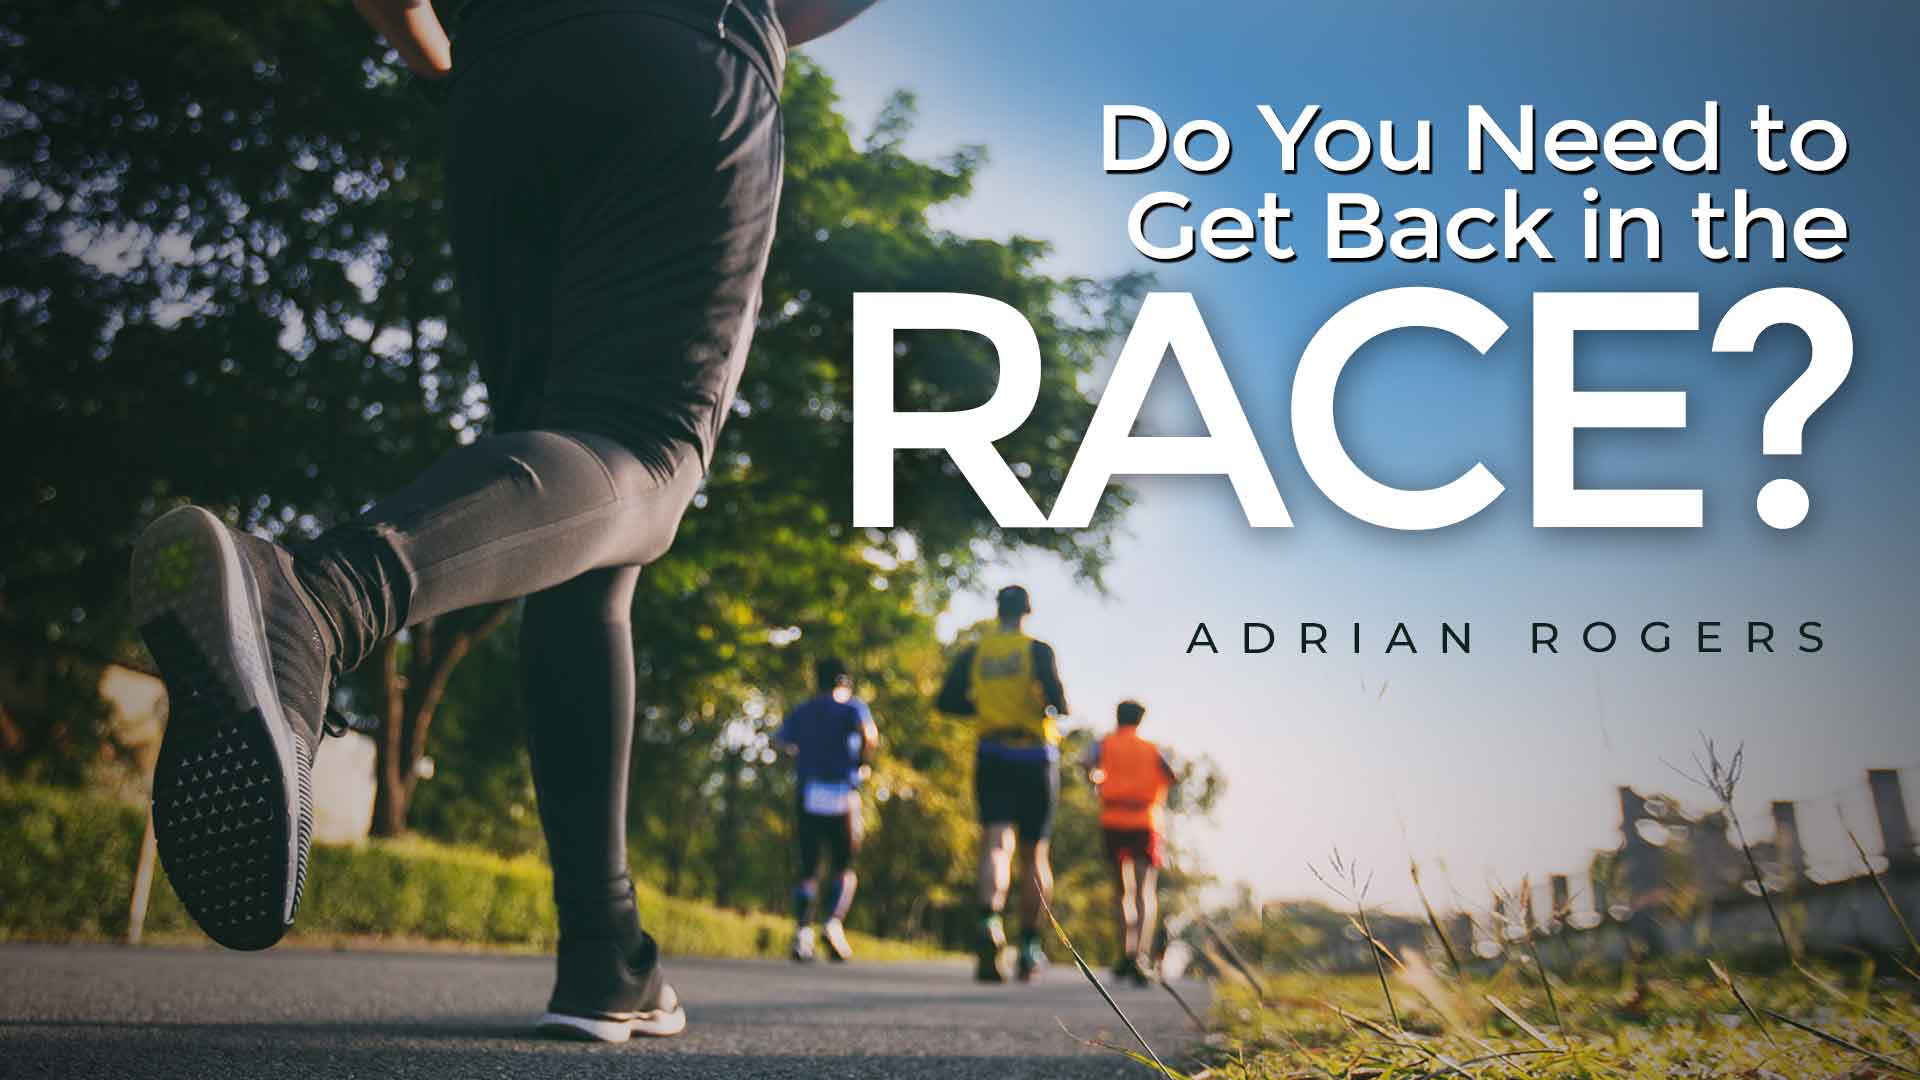 Do You Need to Get Back in the Race 1920x1080